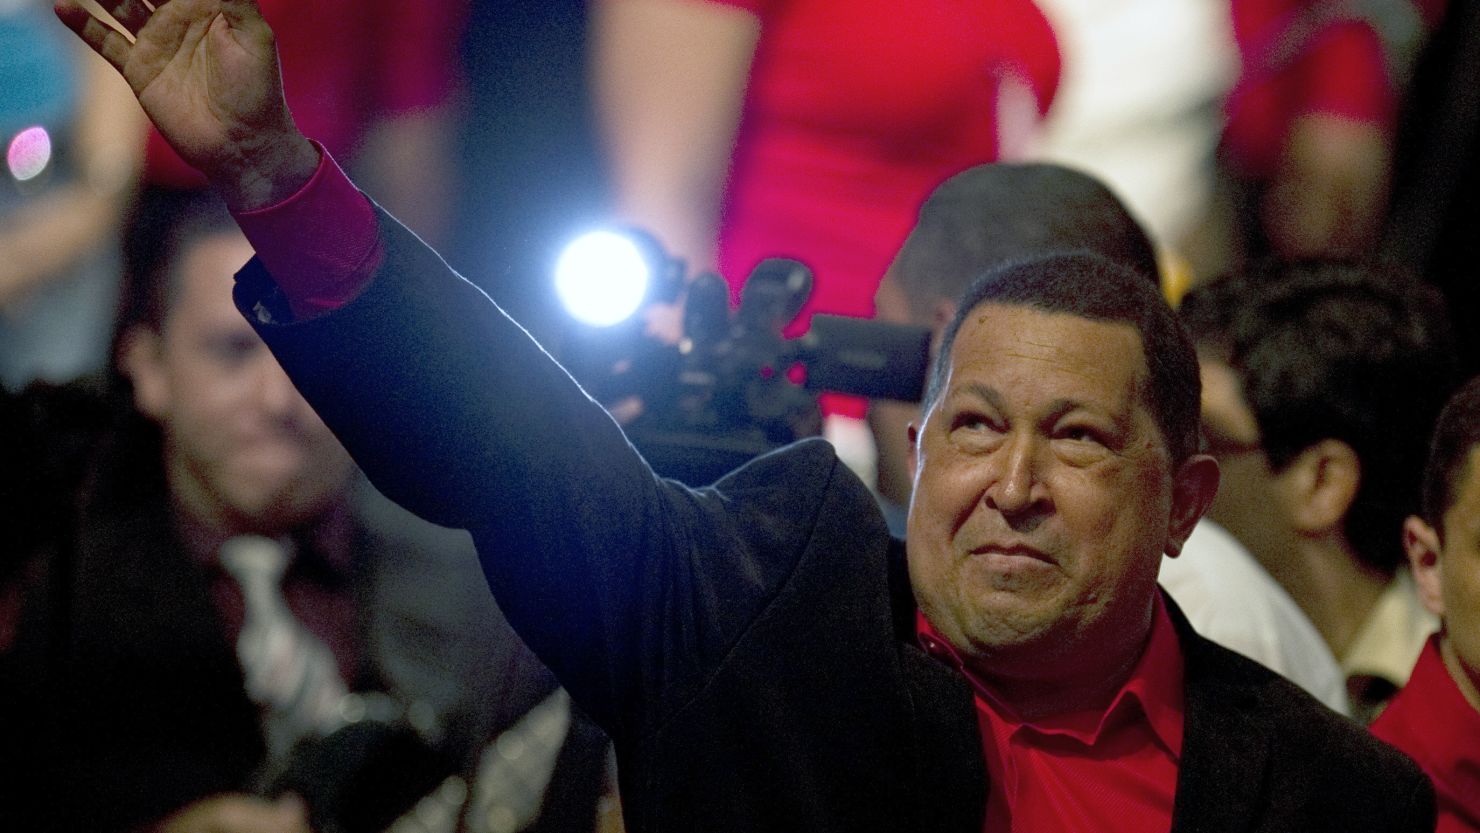 President Hugo Chavez has used the social media to send messages to his followers after surgery in Cuba.